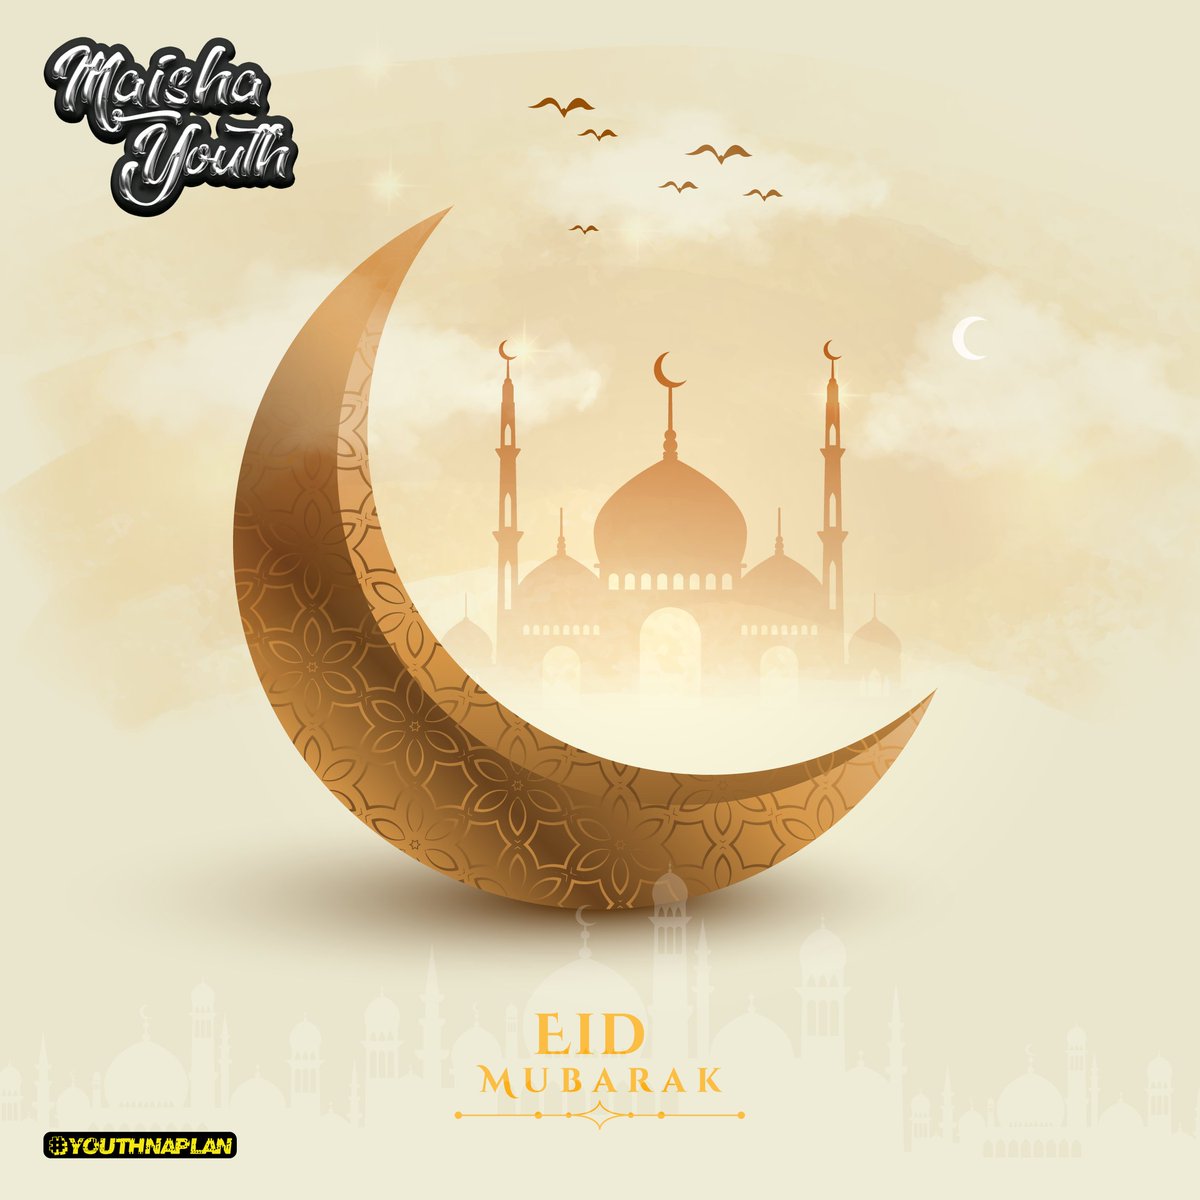 Maisha Youth wishes Eid Mubarak to all our friends and followers! May this special occasion bring you abundant joy, peace, and prosperity. Wishing you a blessed Eid filled with cherished moments and fond memories. #EidMubarak #MaishaYouth